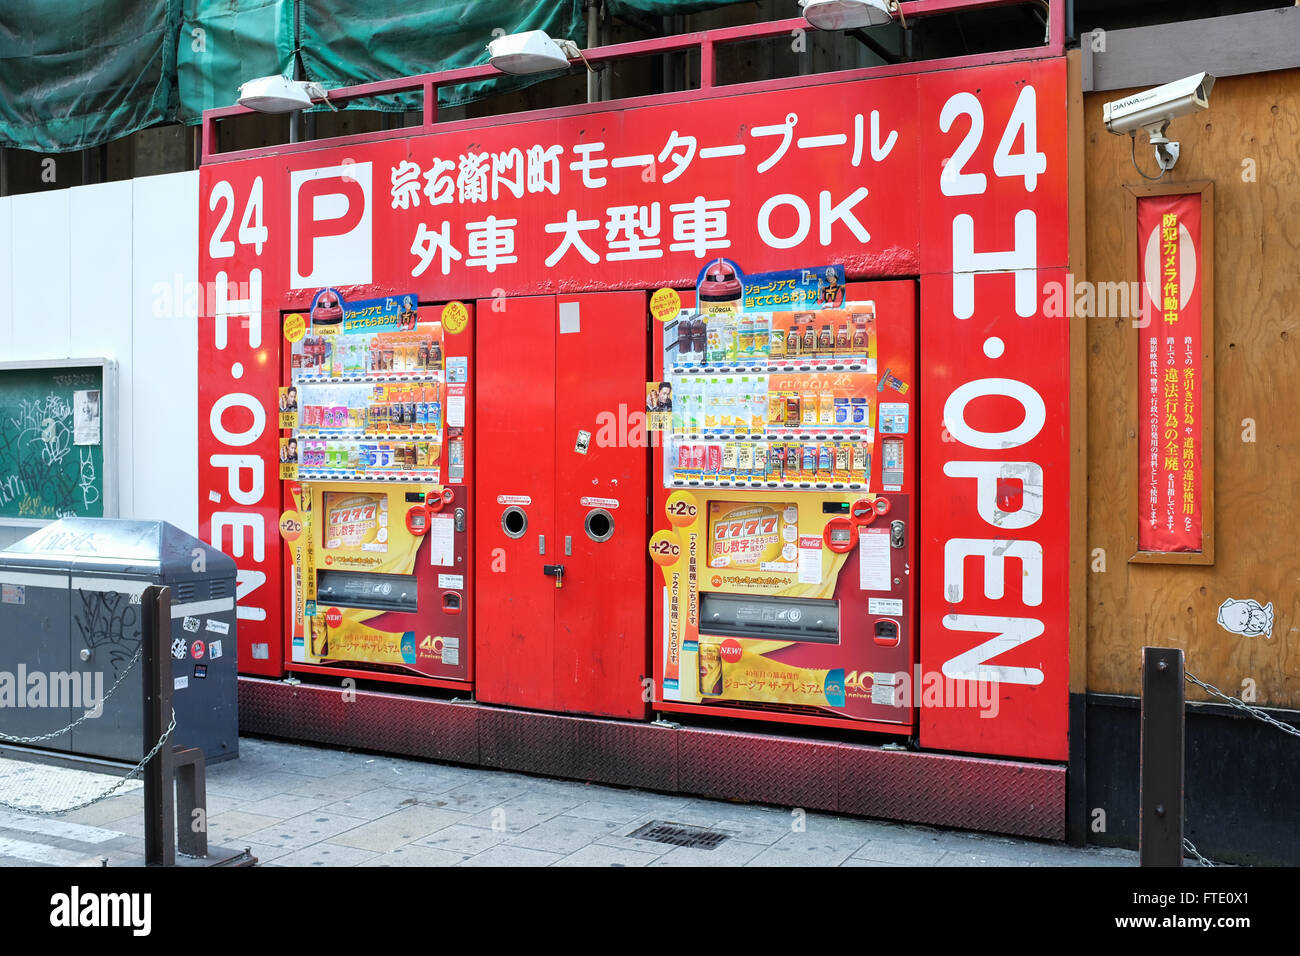 A 24-hour vending machine selling soft drinks on a street in Osaka, Japan. Stock Photo